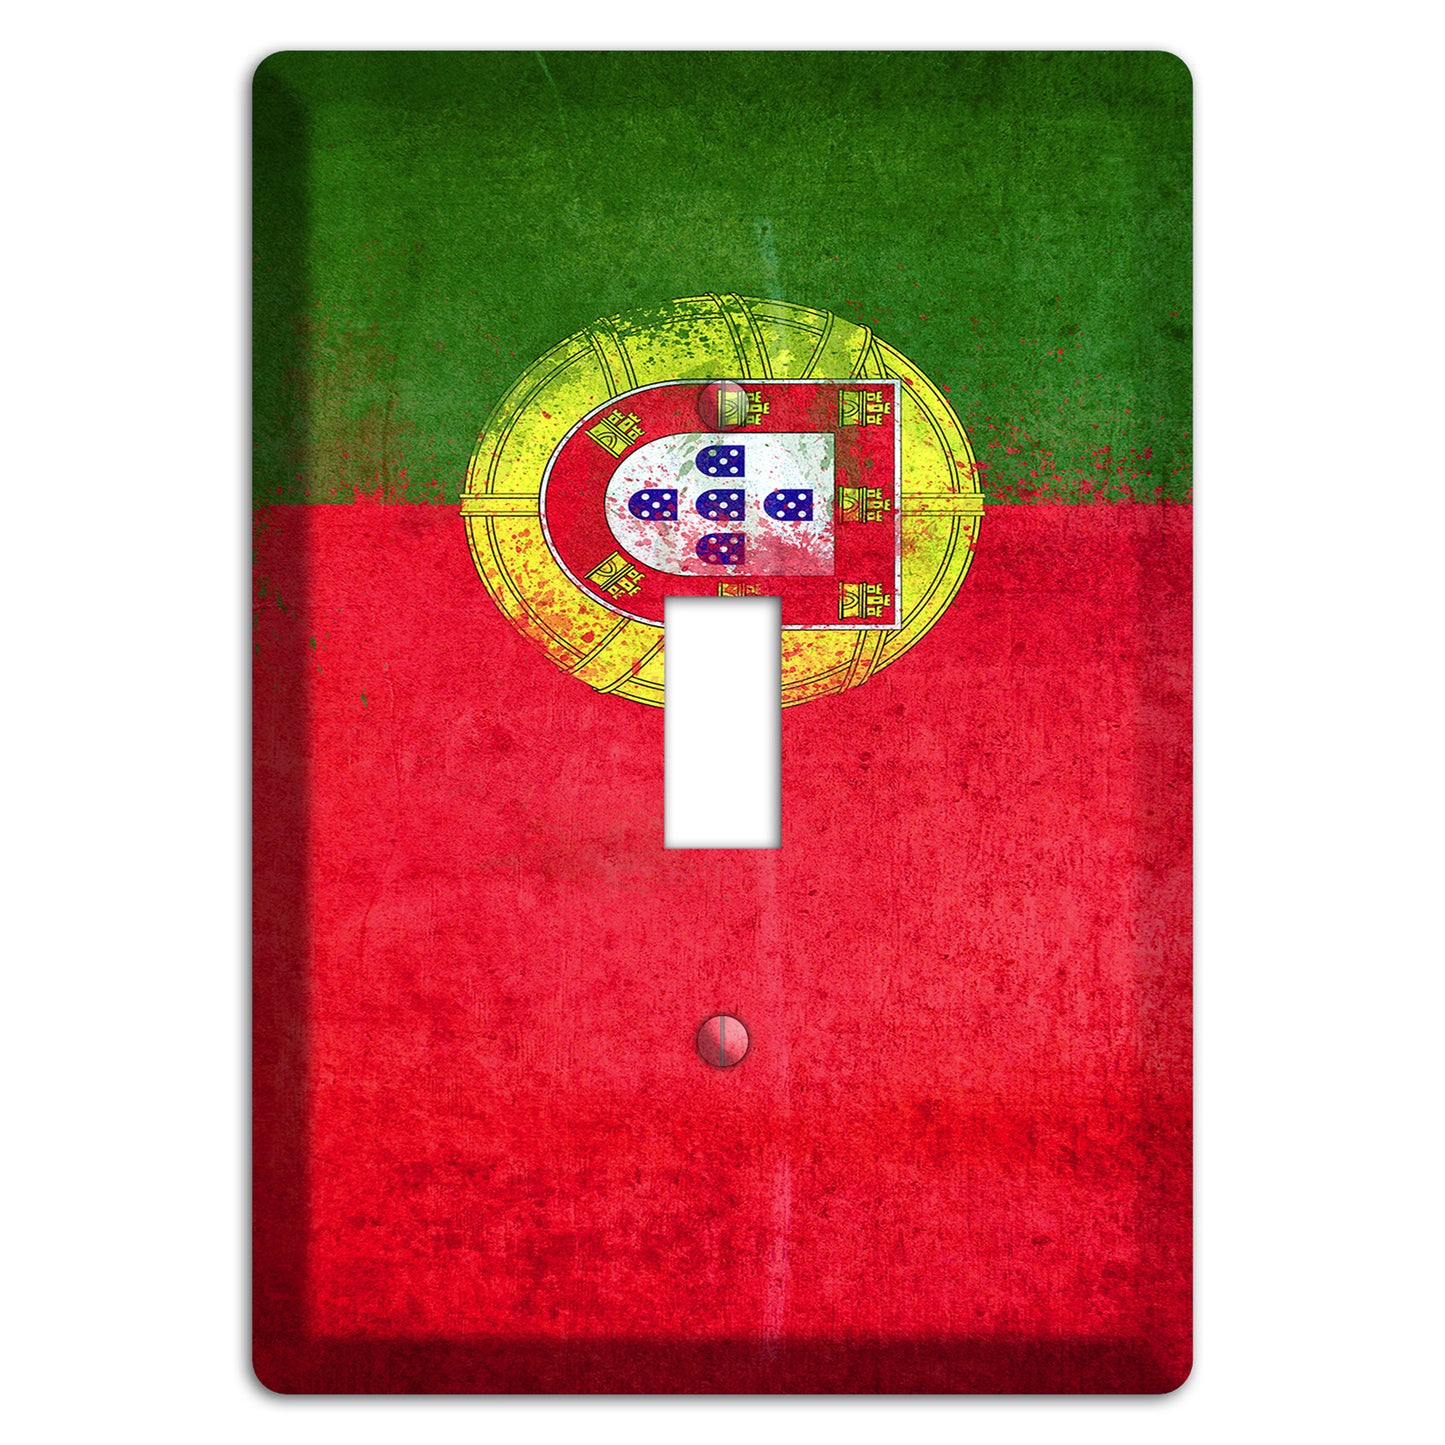 Portugal Cover Plates Cover Plates